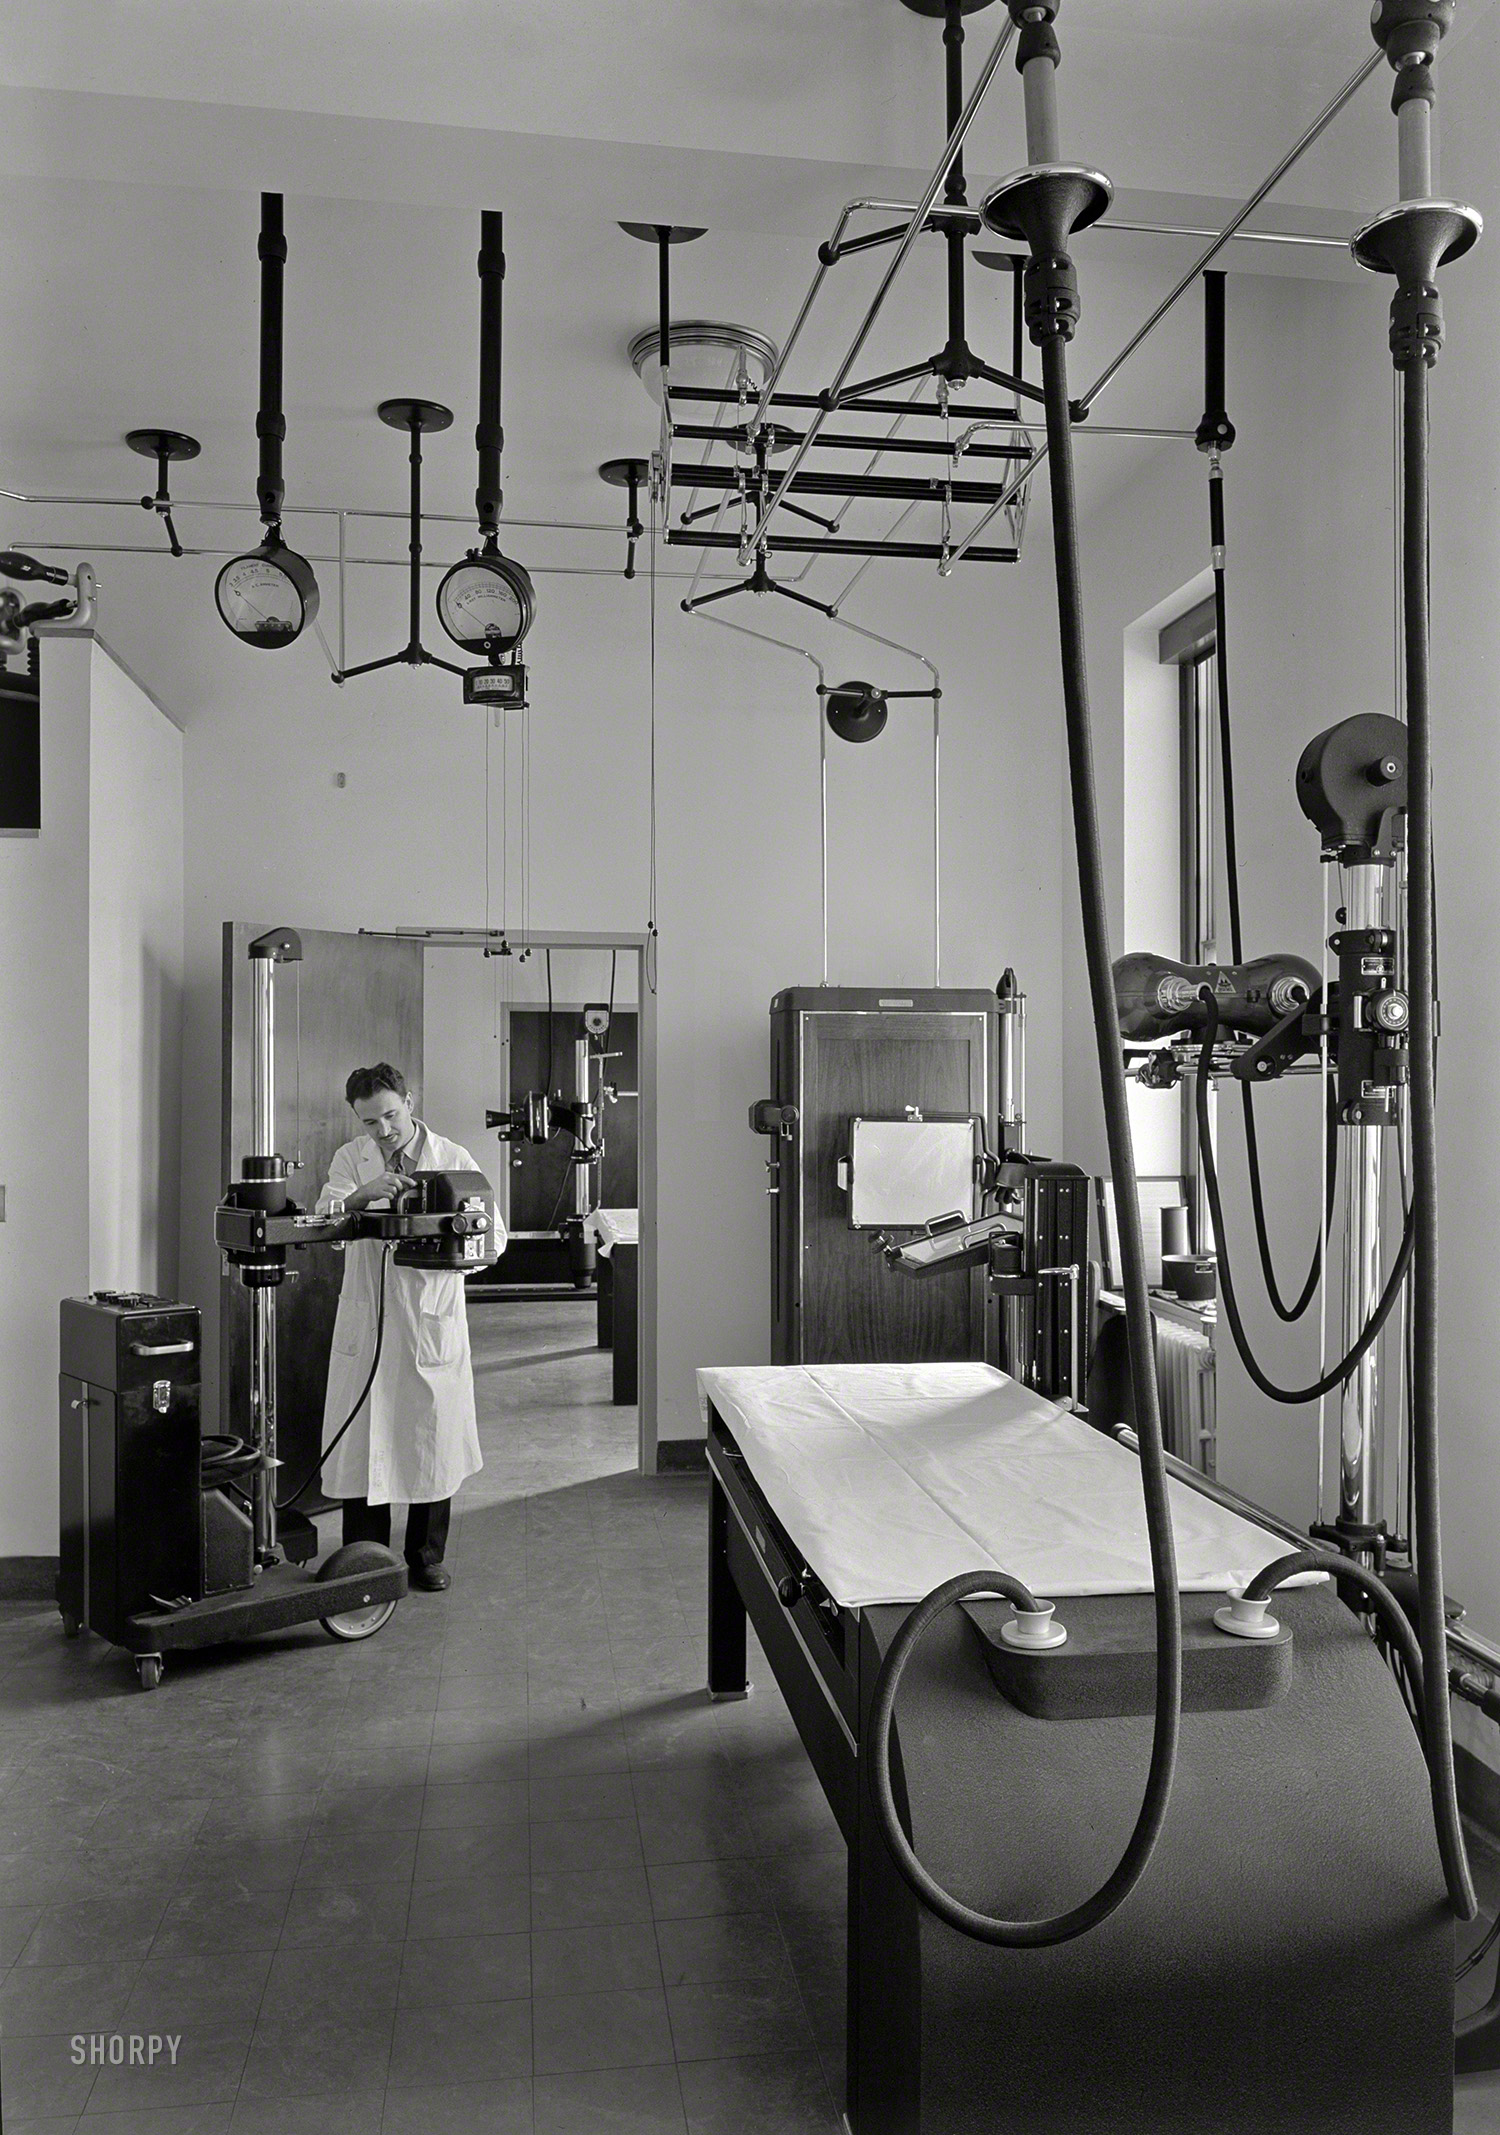 Jan. 11, 1941. "Triboro Hospital for Tuberculosis, Parsons Boulevard, Jamaica, New York. Fluoroscopy room with technician." The doctor will see through you now. 5x7 acetate negative by Gottscho-Schleisner. View full size.